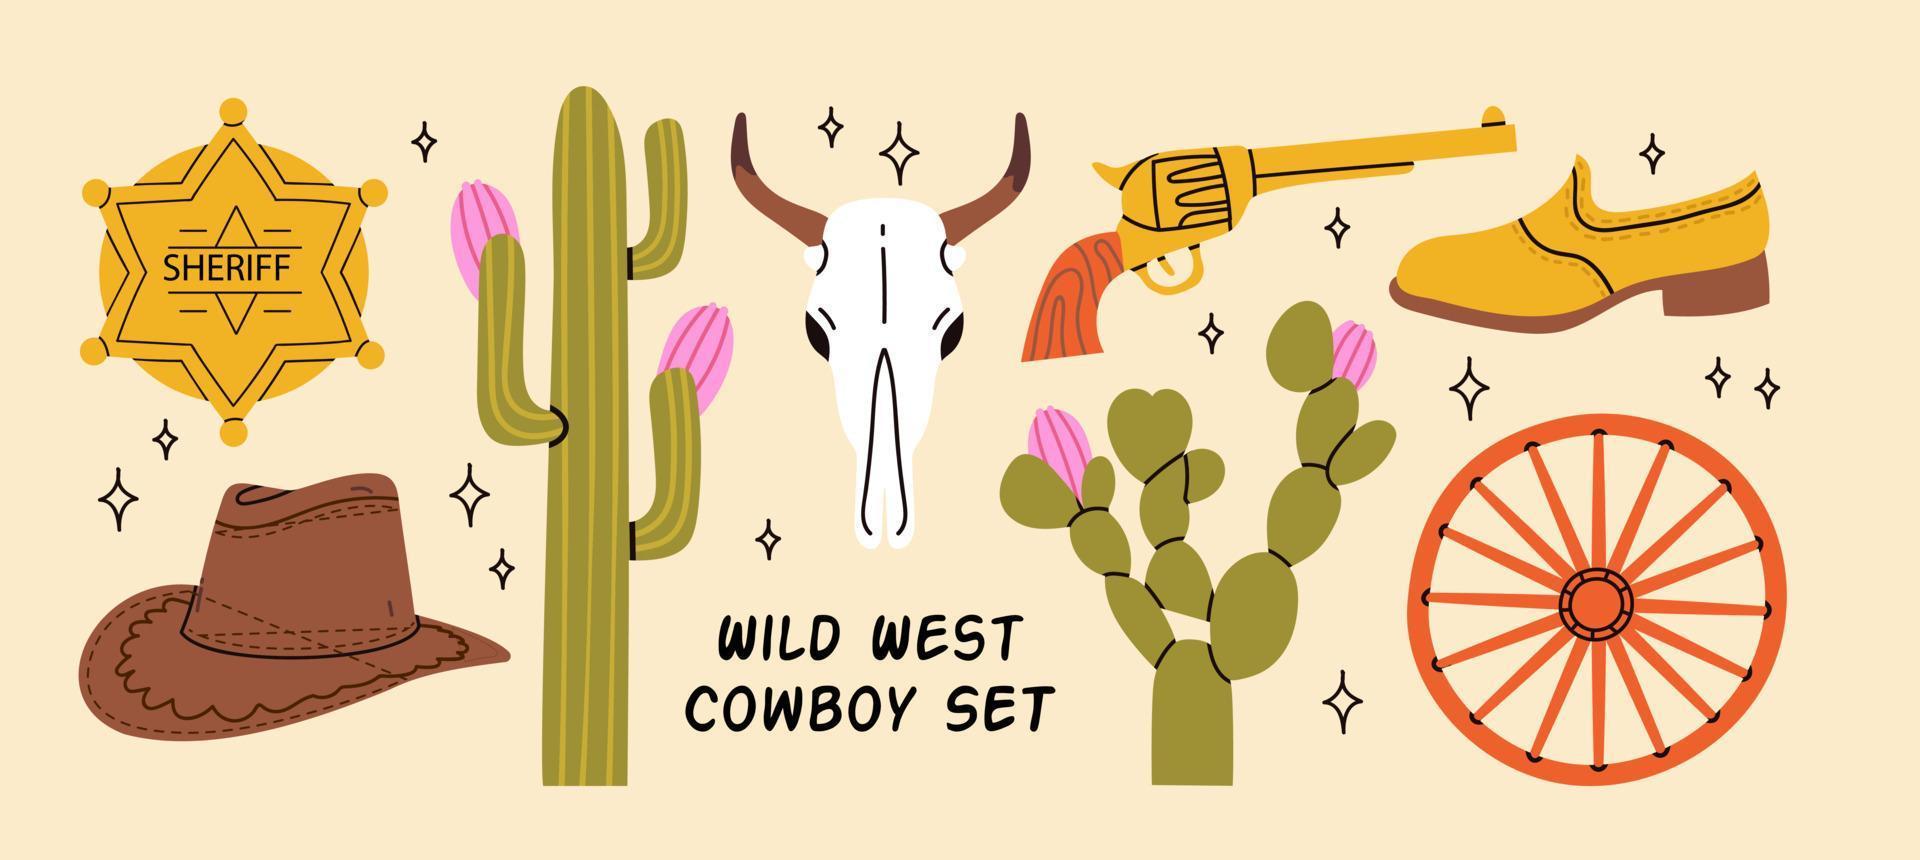 Cowboy western theme, wild west concept. Various objects. Boots, cactus, skull, gun, cowboy hat, horseshoe, sheriff badge star. Hand drawn colorful vector set. Elements are isolated